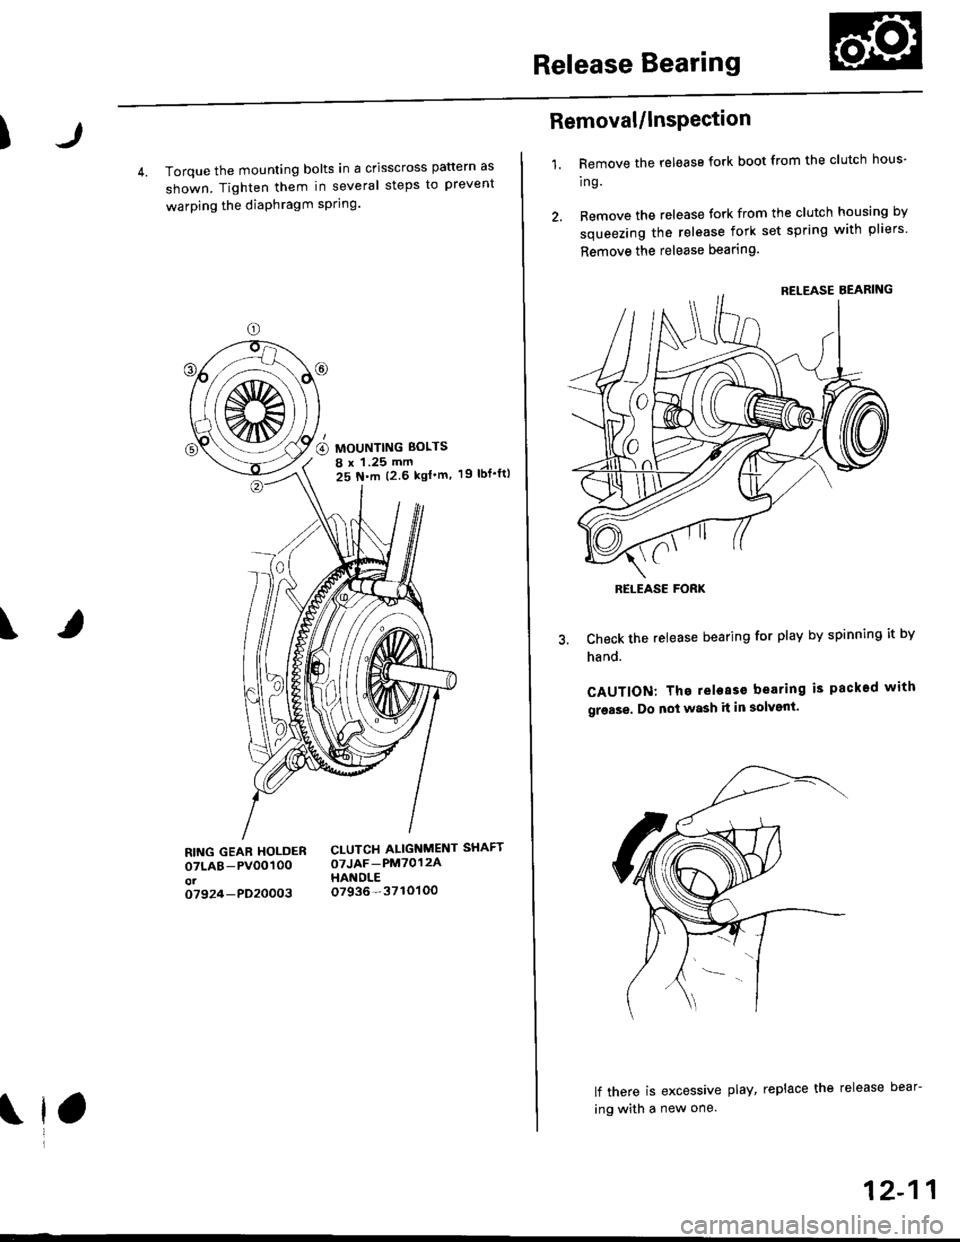 HONDA CIVIC 1997 6.G Workshop Manual Release Bearing
)
4. Torque the mounting bolts in a crisscross pattern as
shown. Tighten them in several steps to prevent
warping the diaPhragm sPring.
19 rbf.ft)
\
RING GEAR HOLDERoTLAB-PV00100ot0792